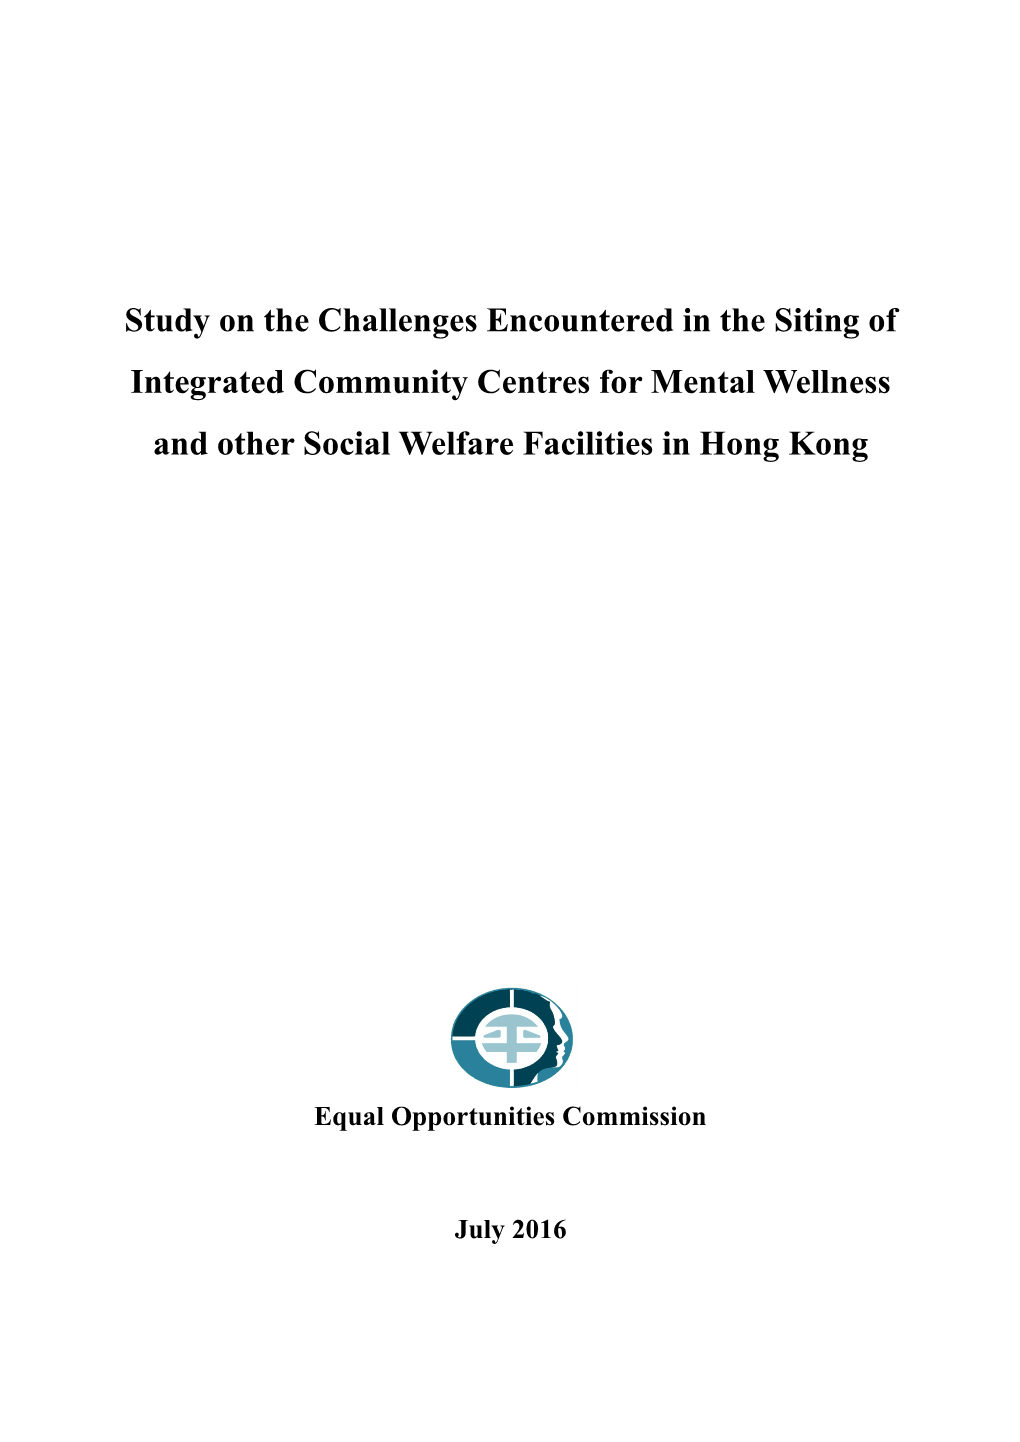 Study on the Challenges Encountered in the Siting of Integrated Community Centres for Mental Wellness and Other Social Welfare Facilities in Hong Kong